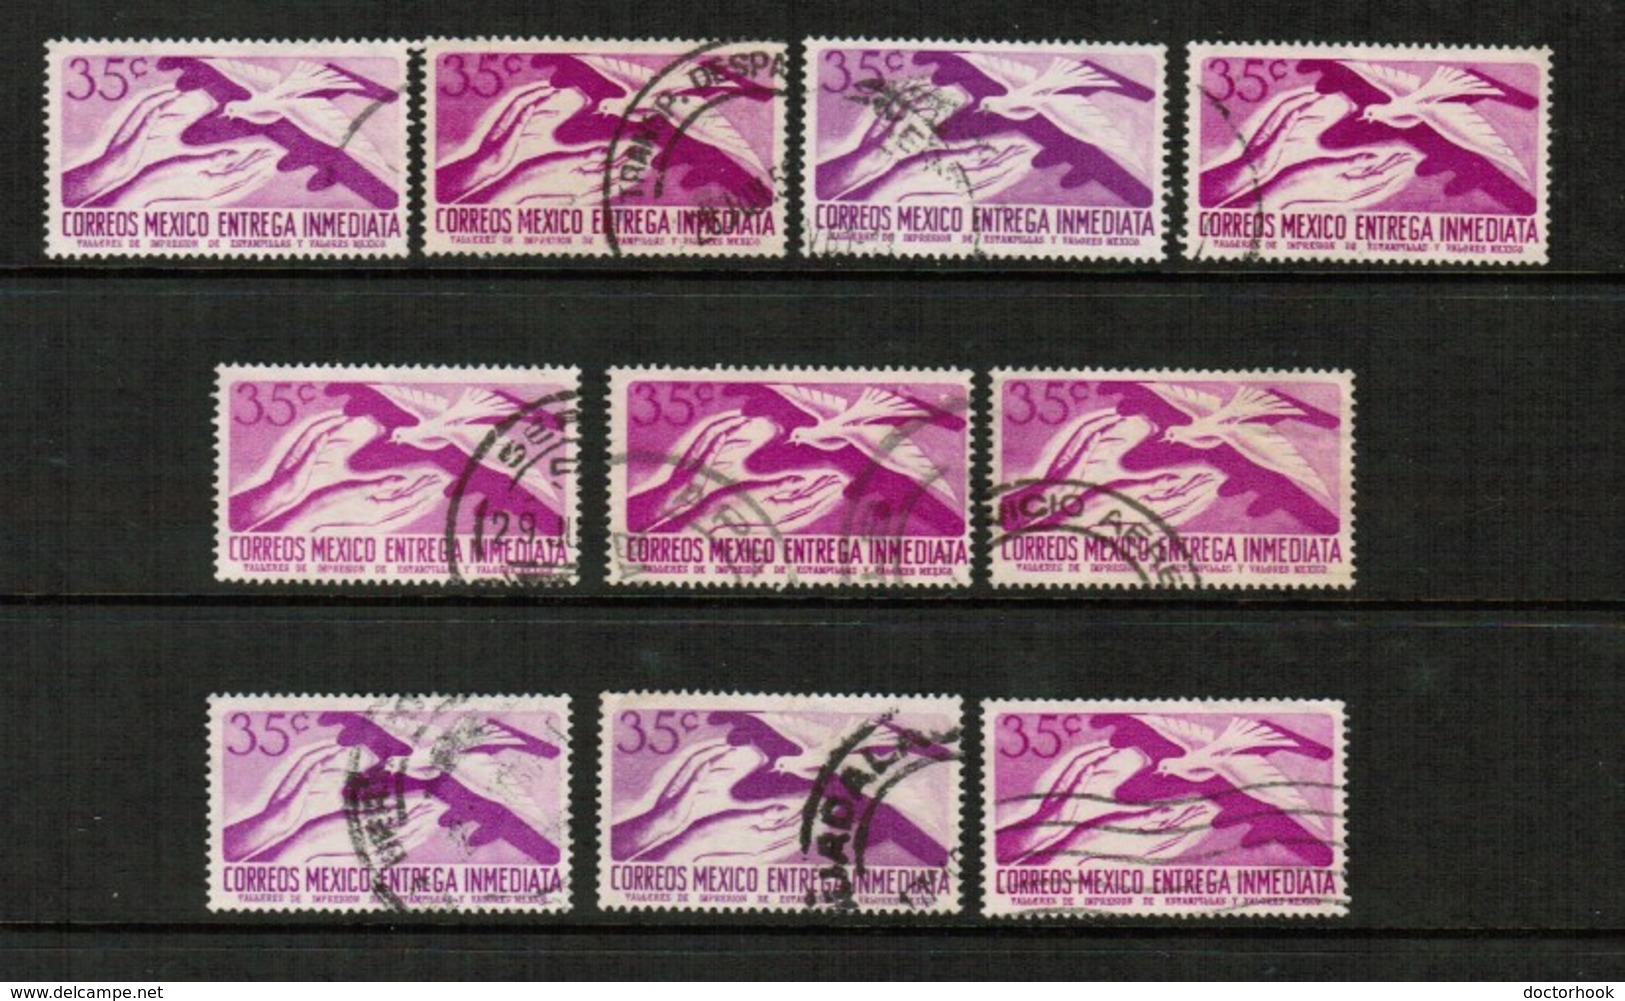 MEXICO   Scott # E 16 USED WHOLESALE LOT OF 10 (WH-244) - Vrac (max 999 Timbres)